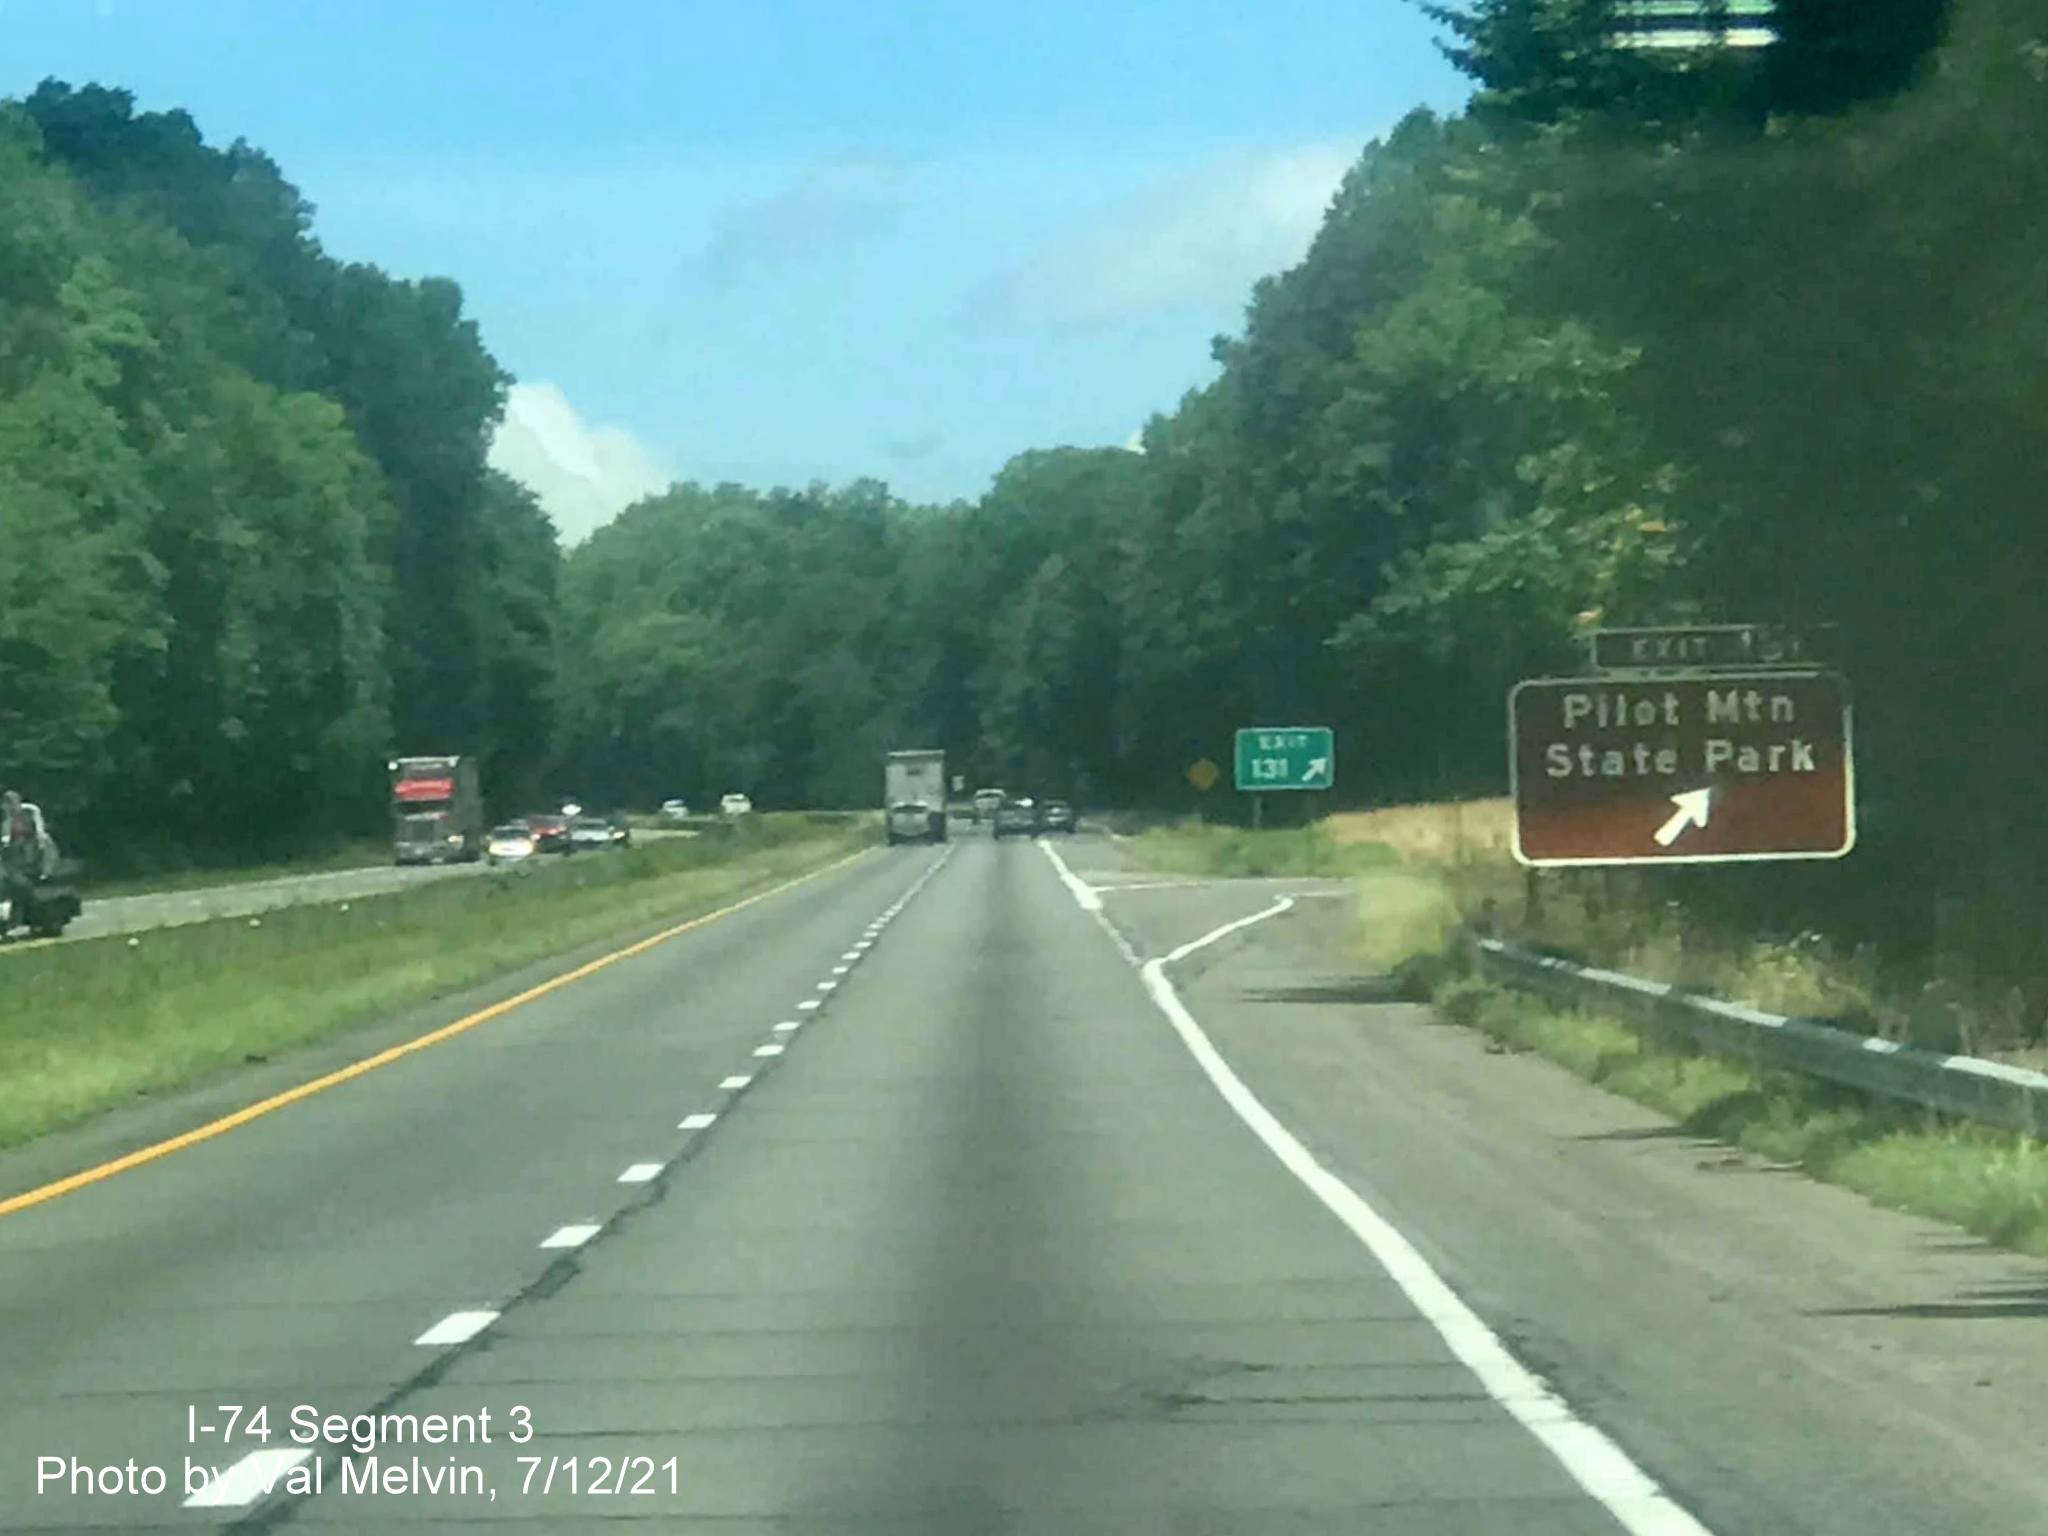 Image of ramp sign for Pilot Mountain State Park exit on US 52 North (Future I-74 West) in Surry County, by Val Melvin, July 2021